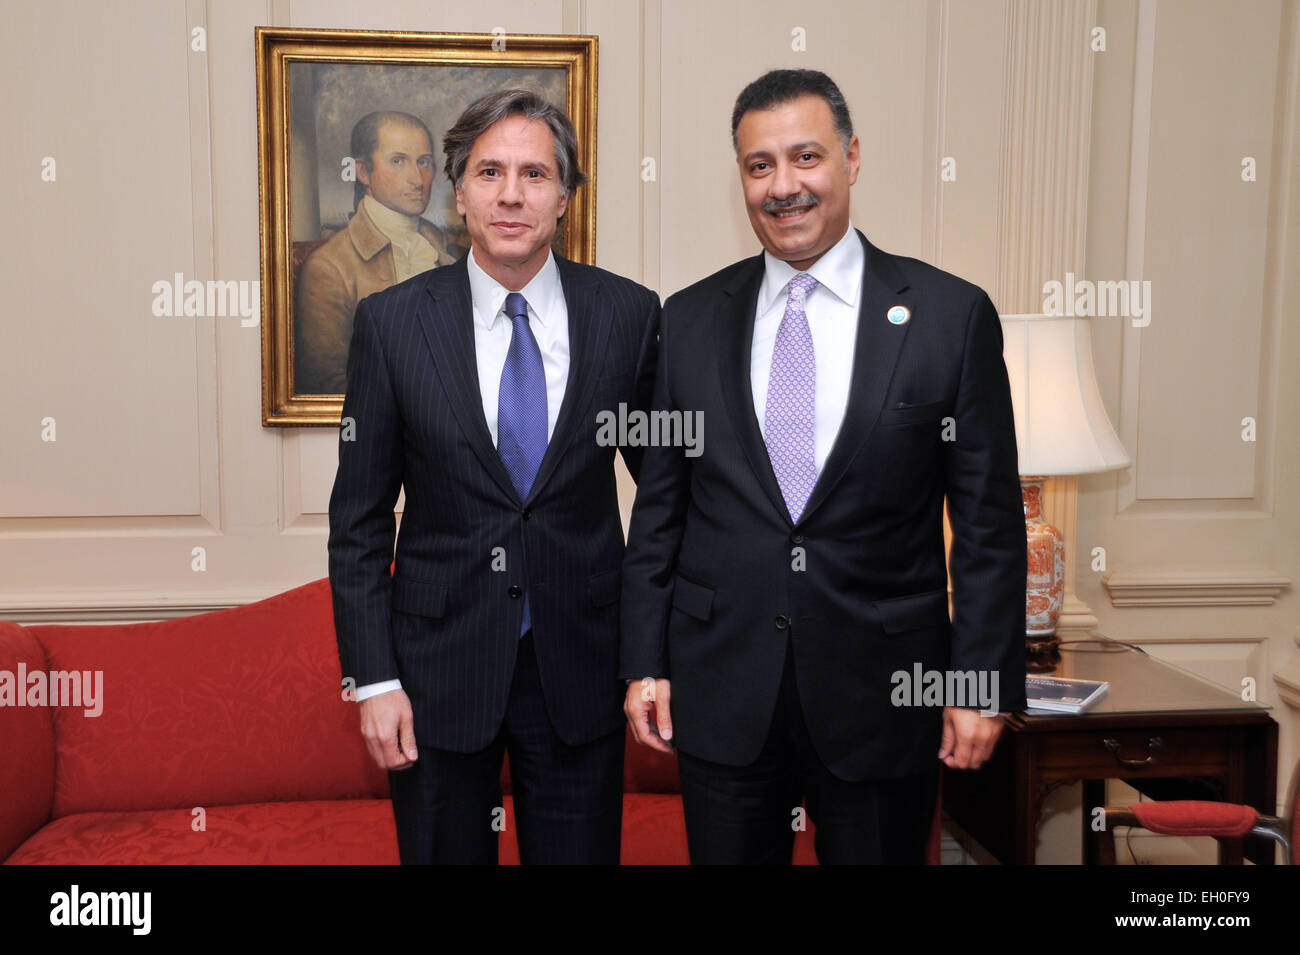 Deputy Secretary of State Antony &quot;Tony&quot; Blinken poses for a photo with Saudi Deputy Foreign Minister Prince Abd al-Aziz bin Abdullah Al Saud before their bilateral meeting at the U.S. Department of State in Washington, D.C., on February 19, 2015. The Deputy Secretary met with the Saudi Deputy Foreign Minister on the margins of the White House Summit to Counter Violent Extremism. Stock Photo